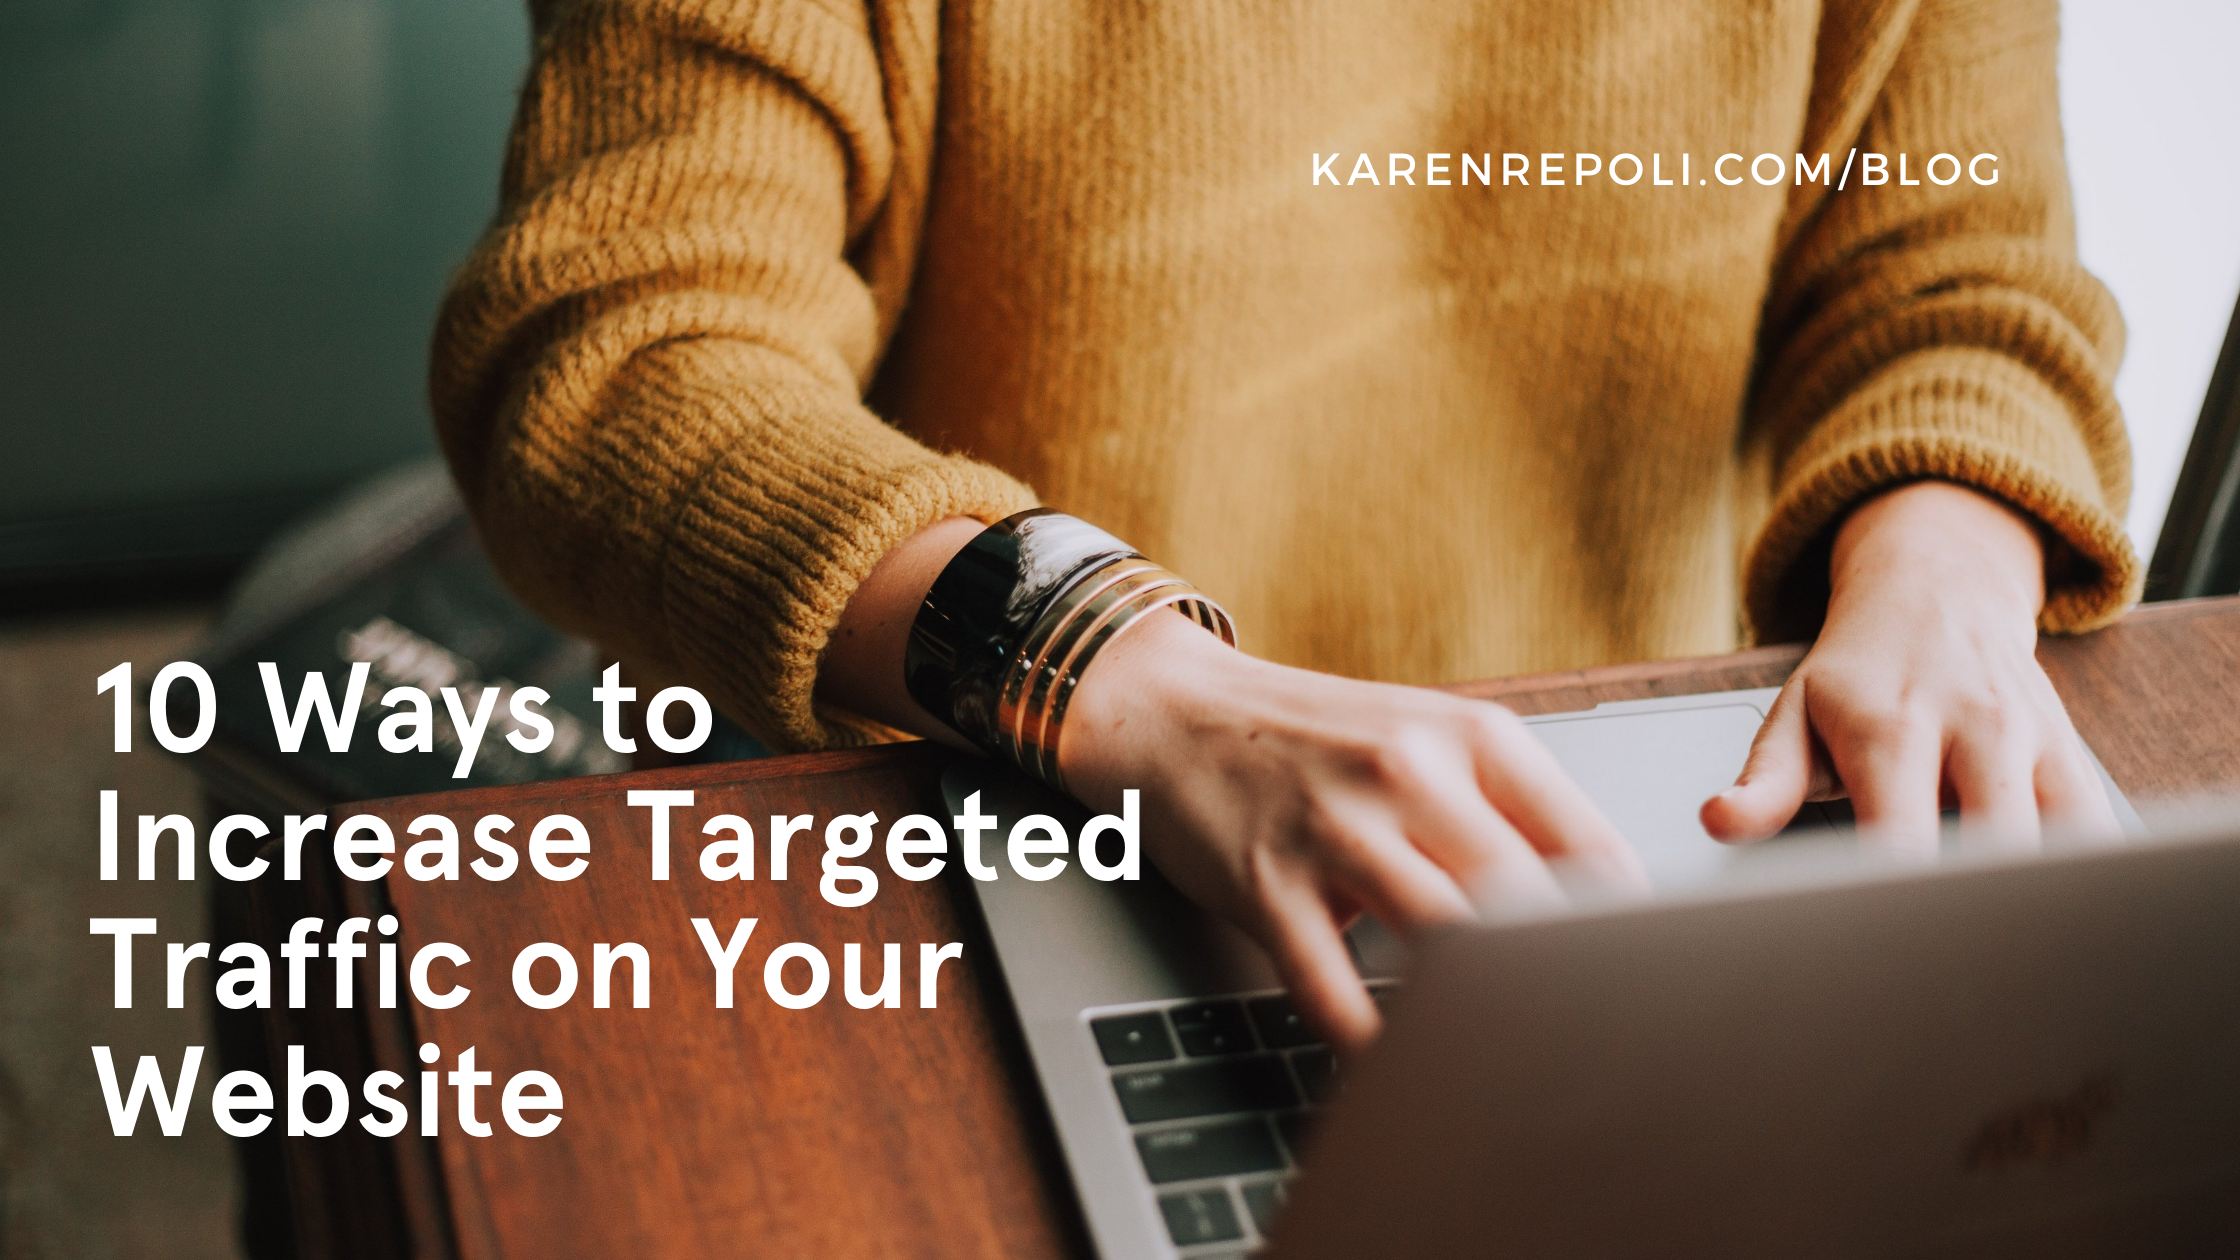 10 Ways to Increase Targeted Traffic on Your Website